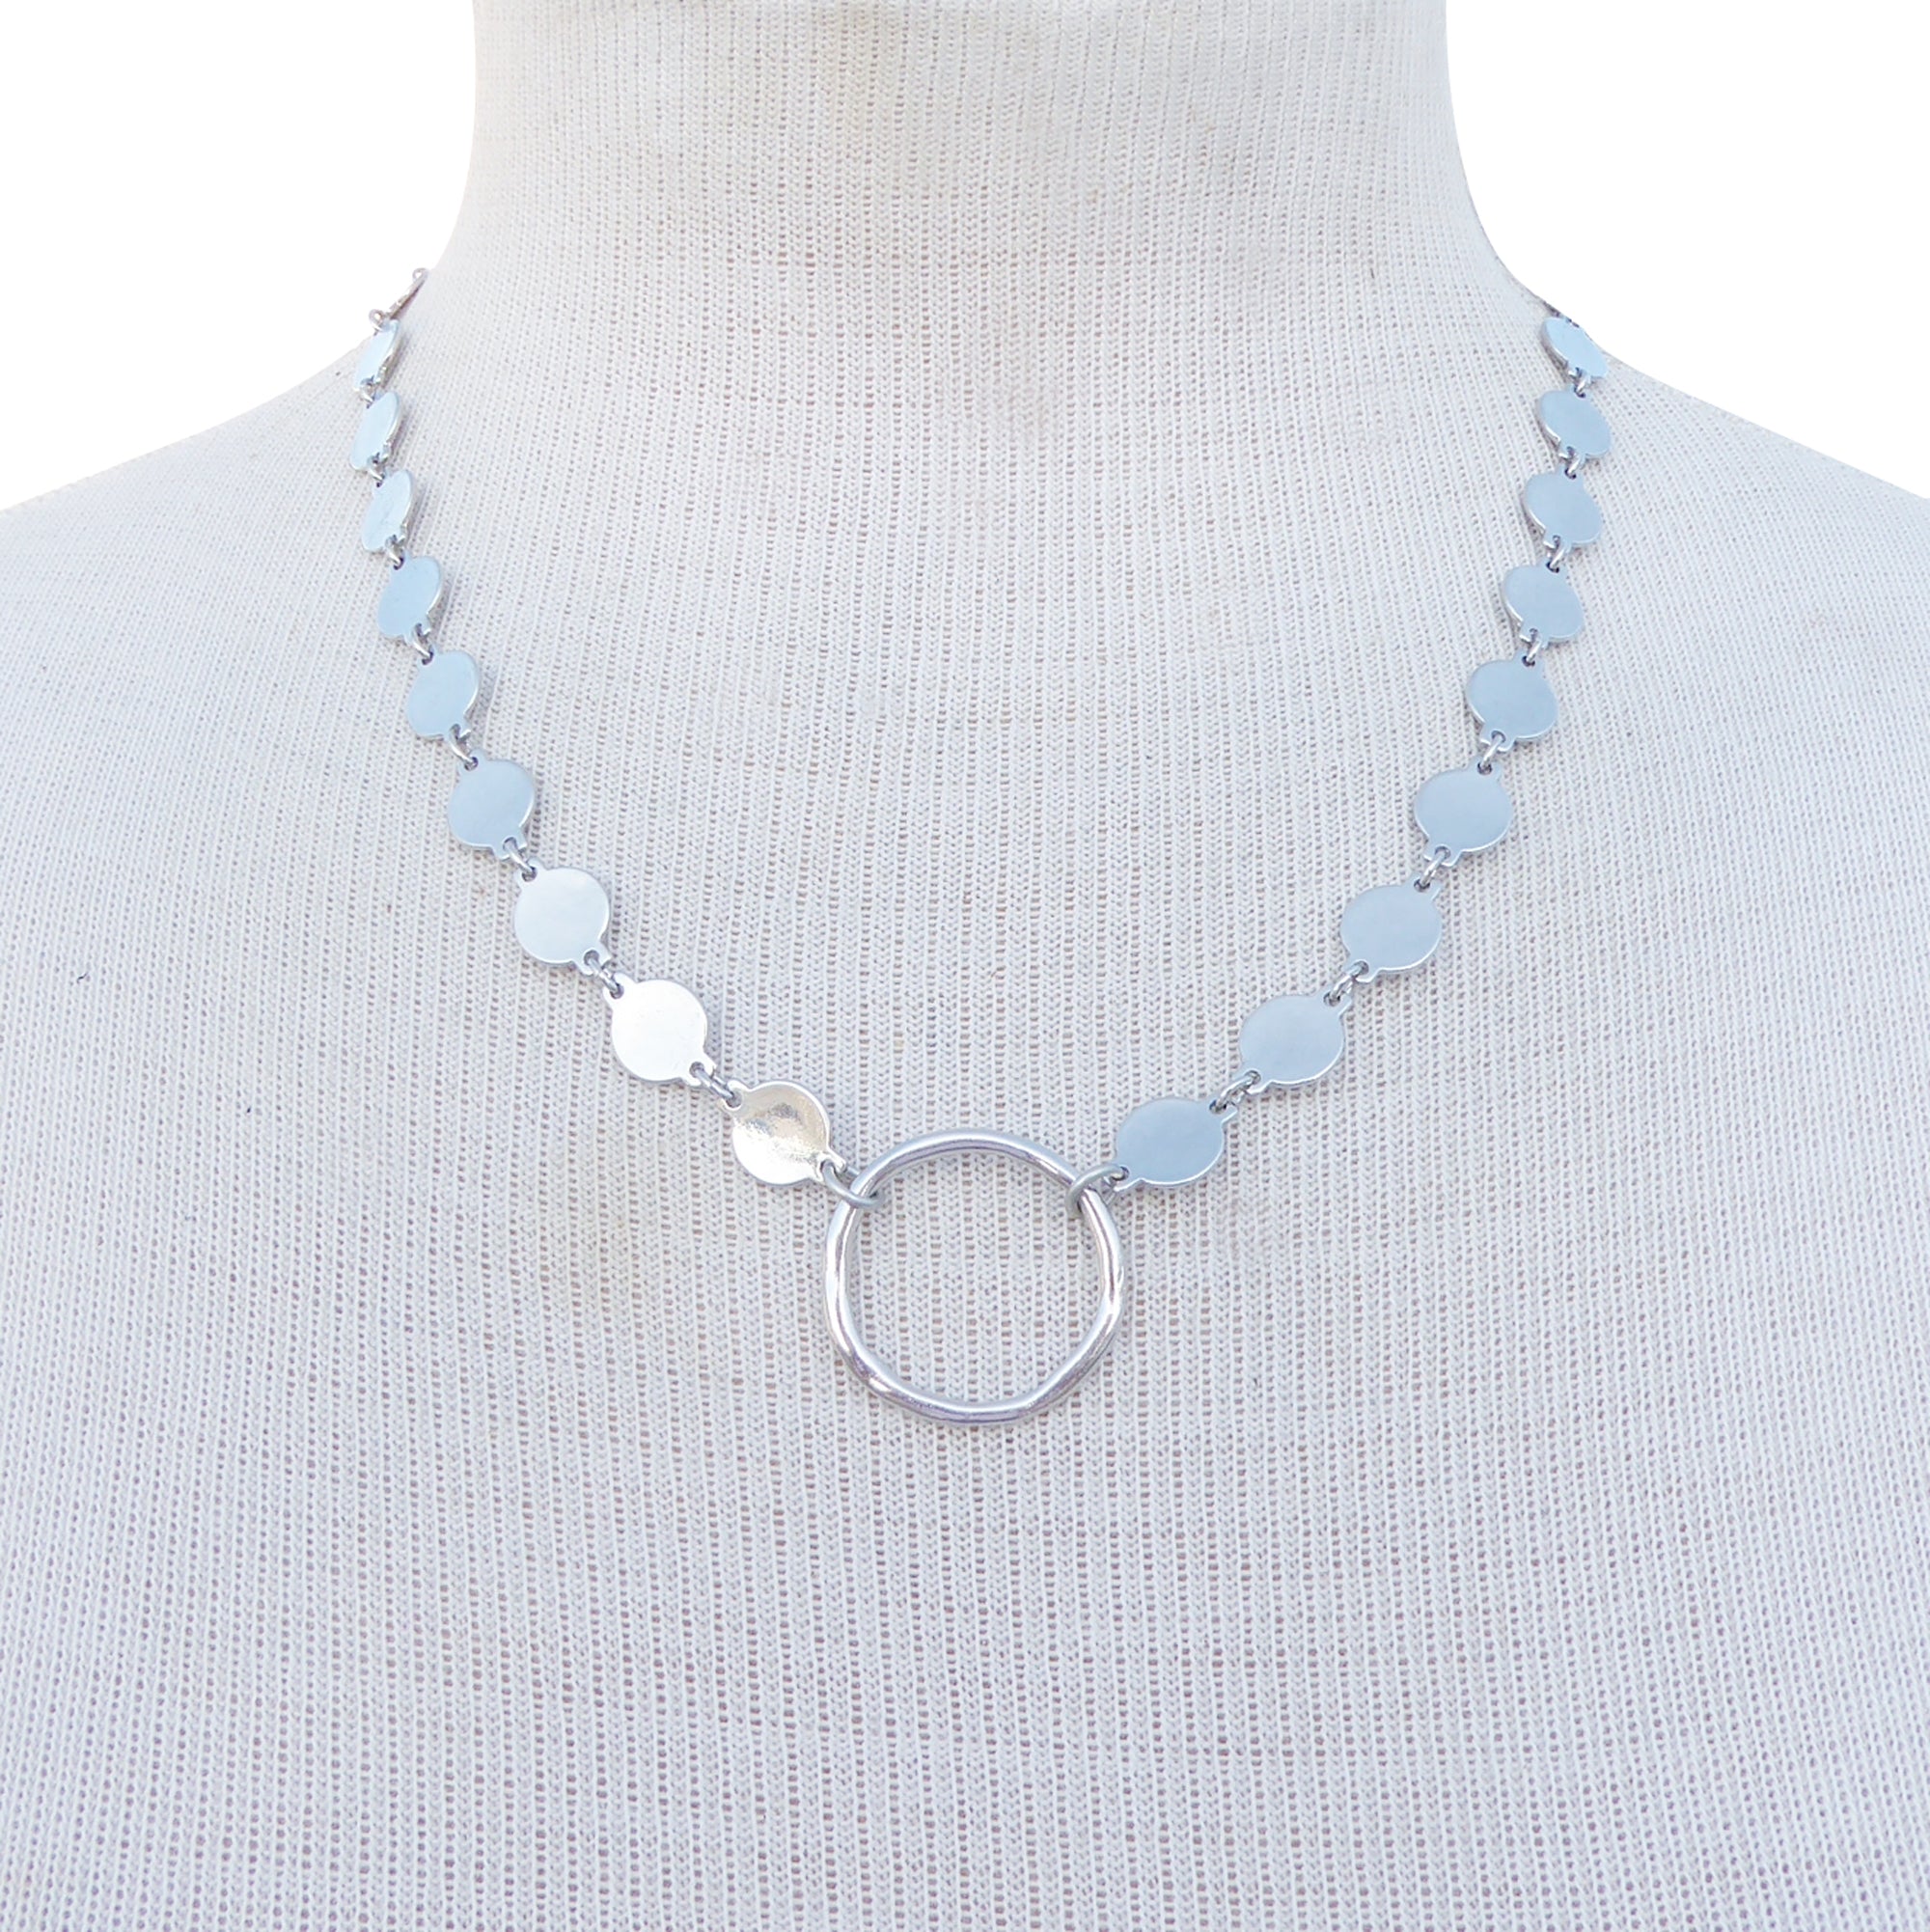 Silver O ring necklace